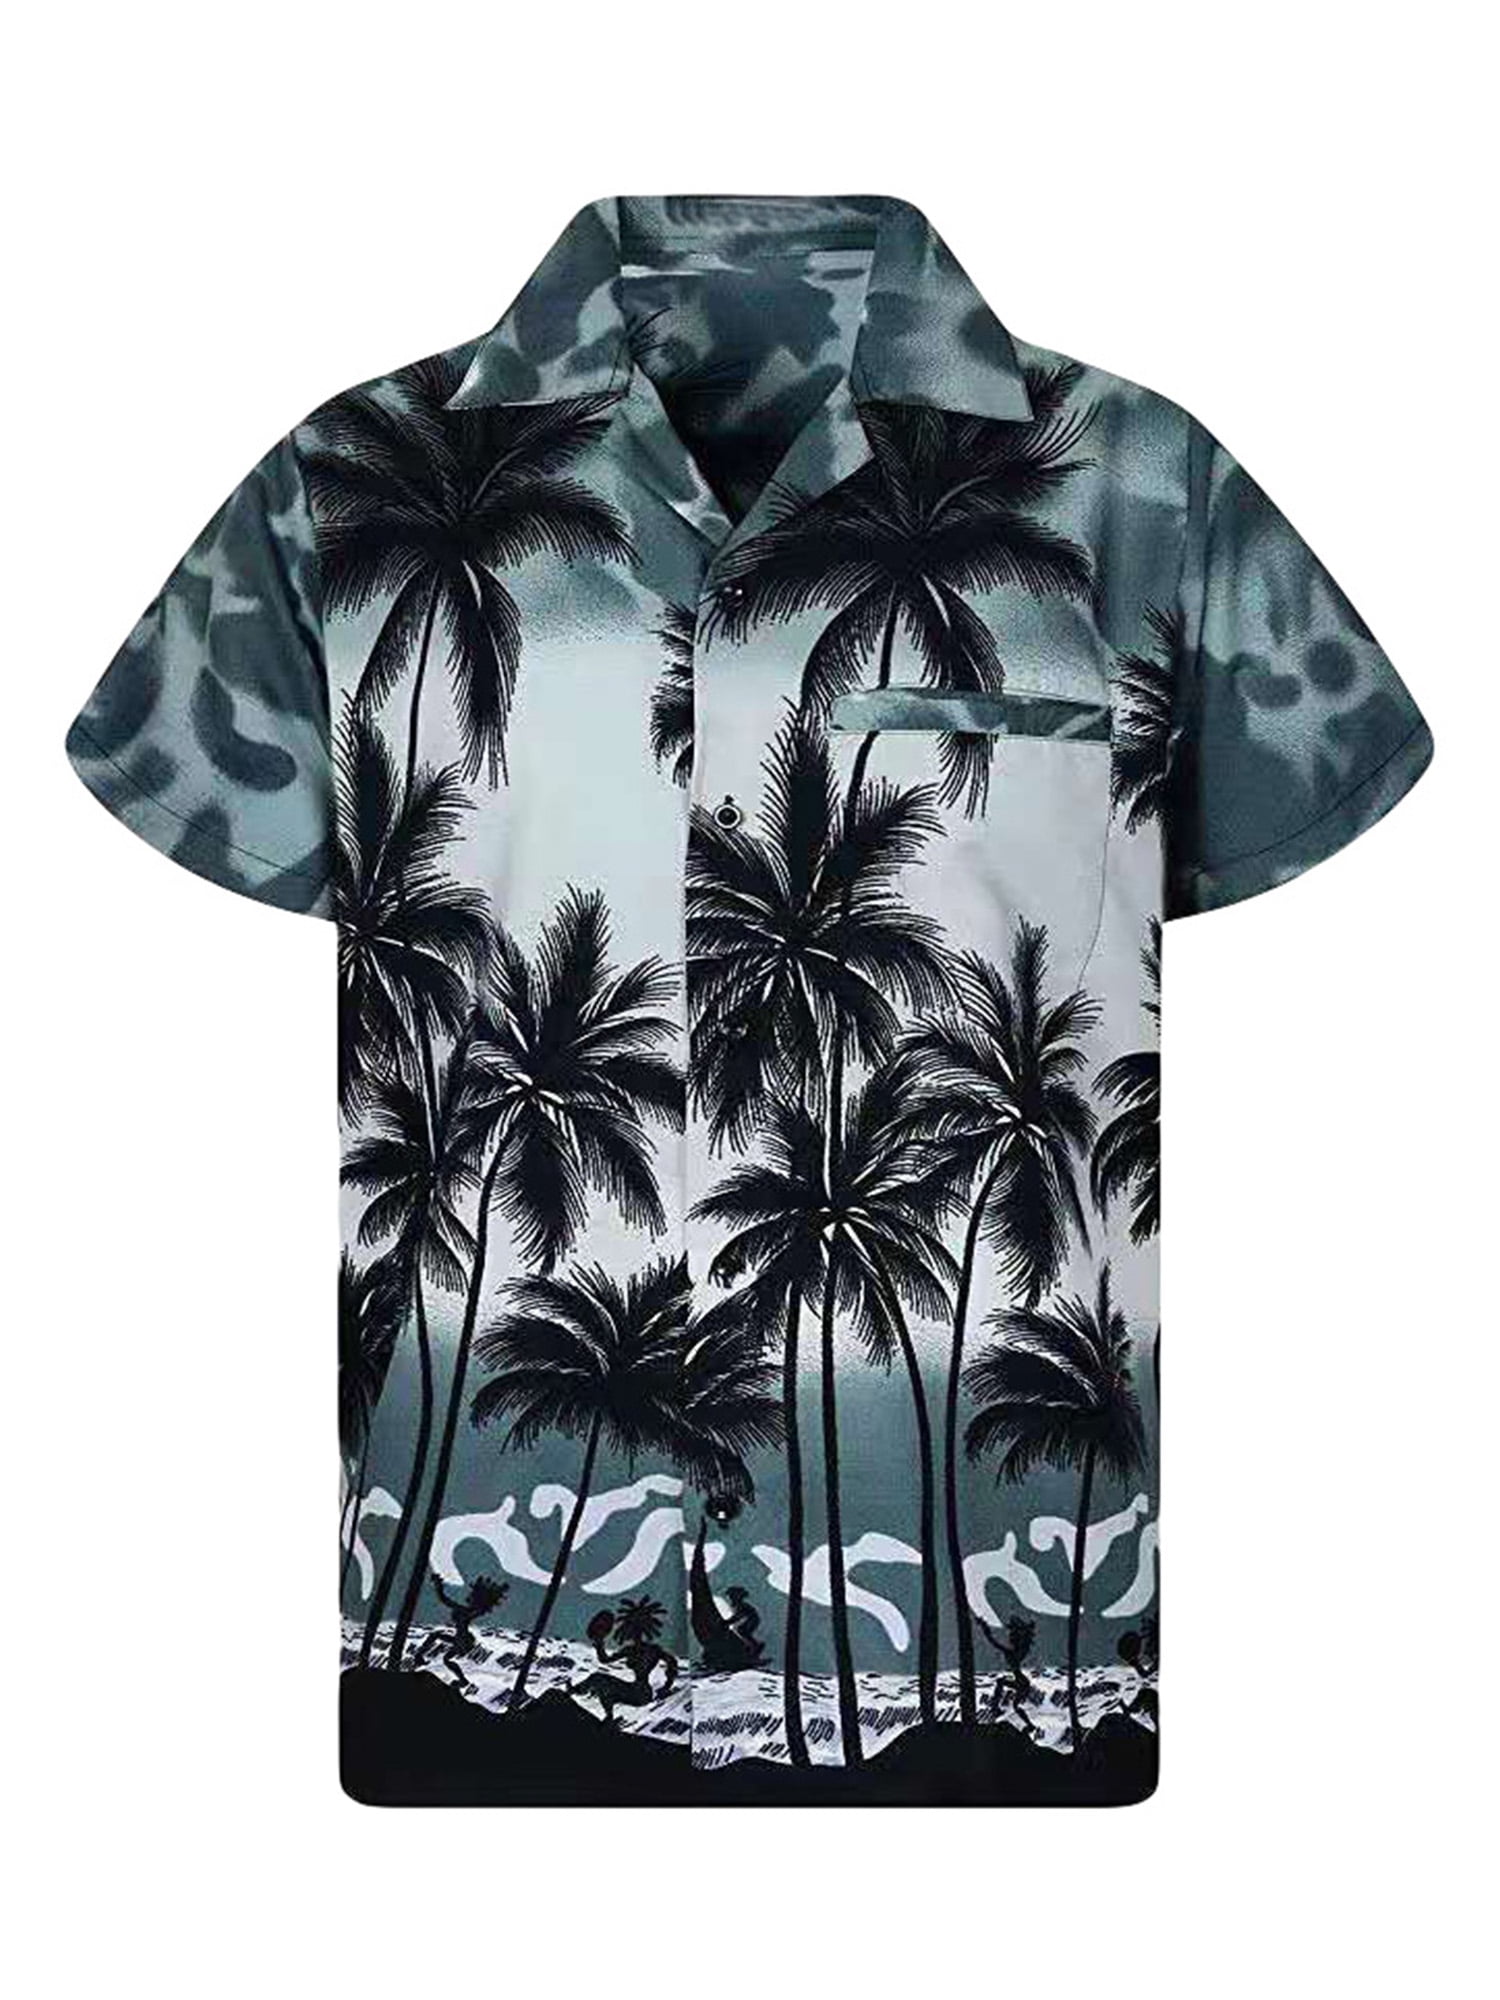 Hmlai Clearance Men Shirts Short Sleeve Tropical Button Down Slim Fit Colorful Paint Graphic Quick Dry Casual Beach Shirts 